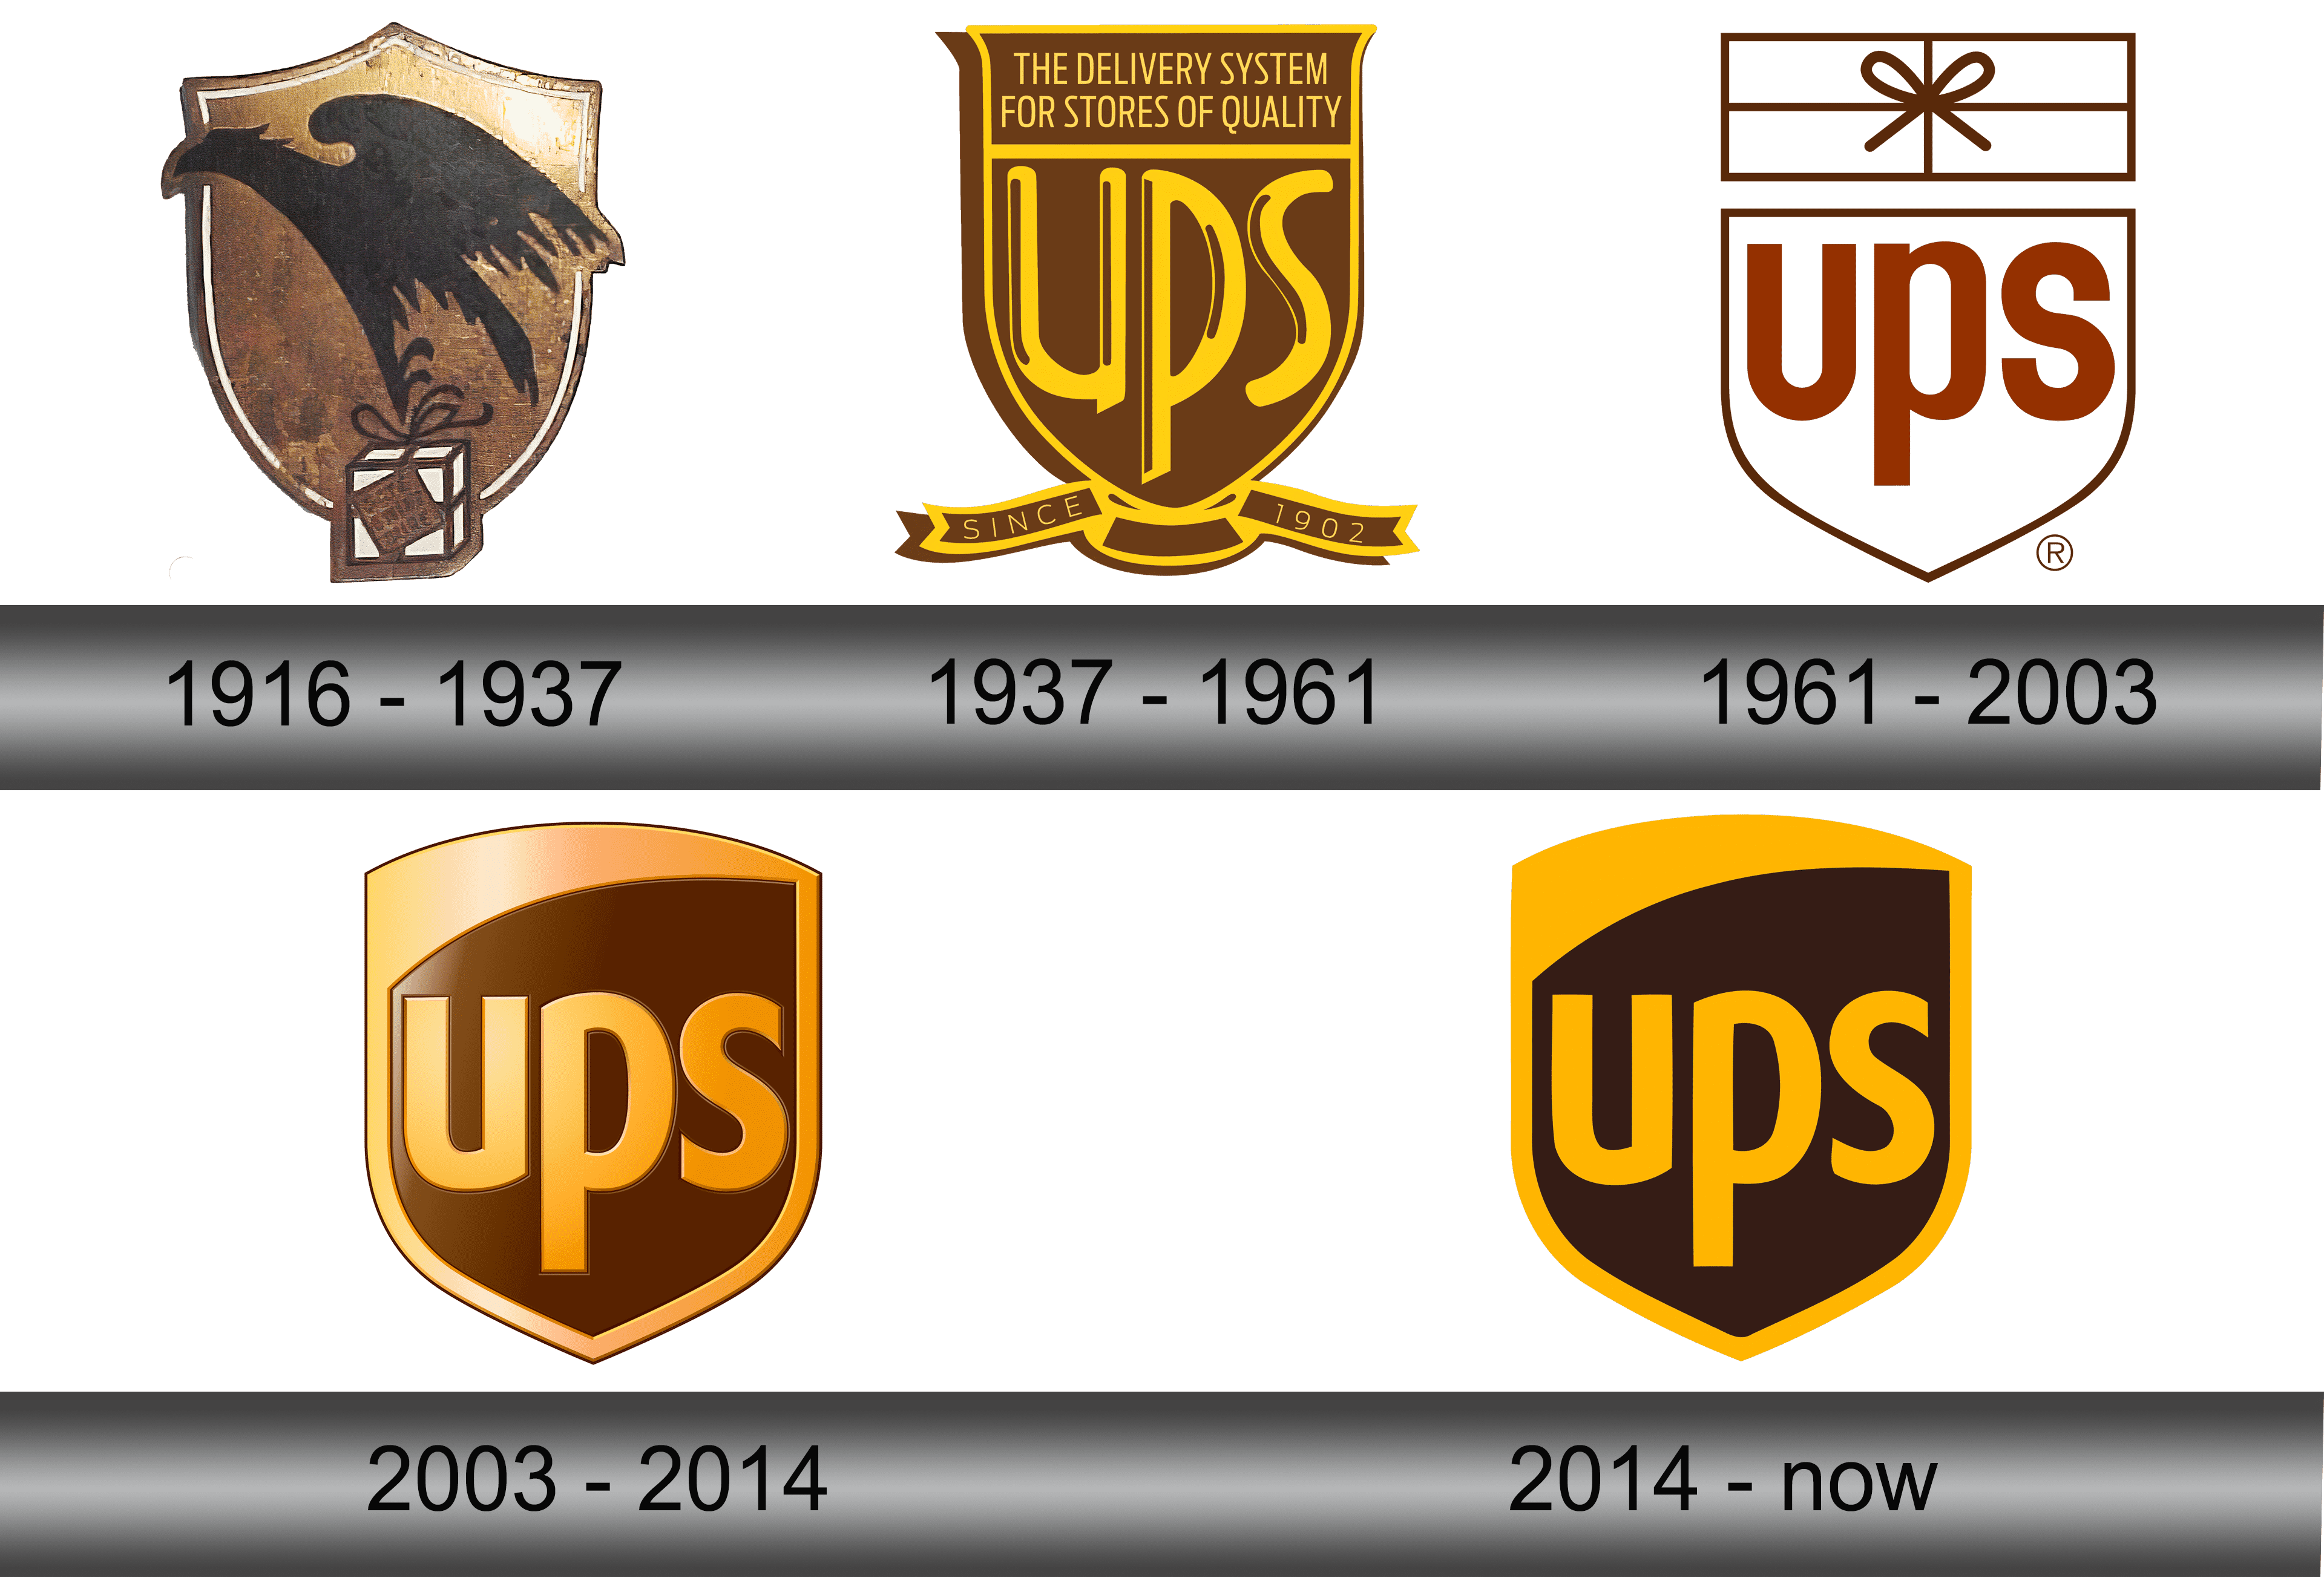 UPS Logo and symbol, meaning, history, sign.